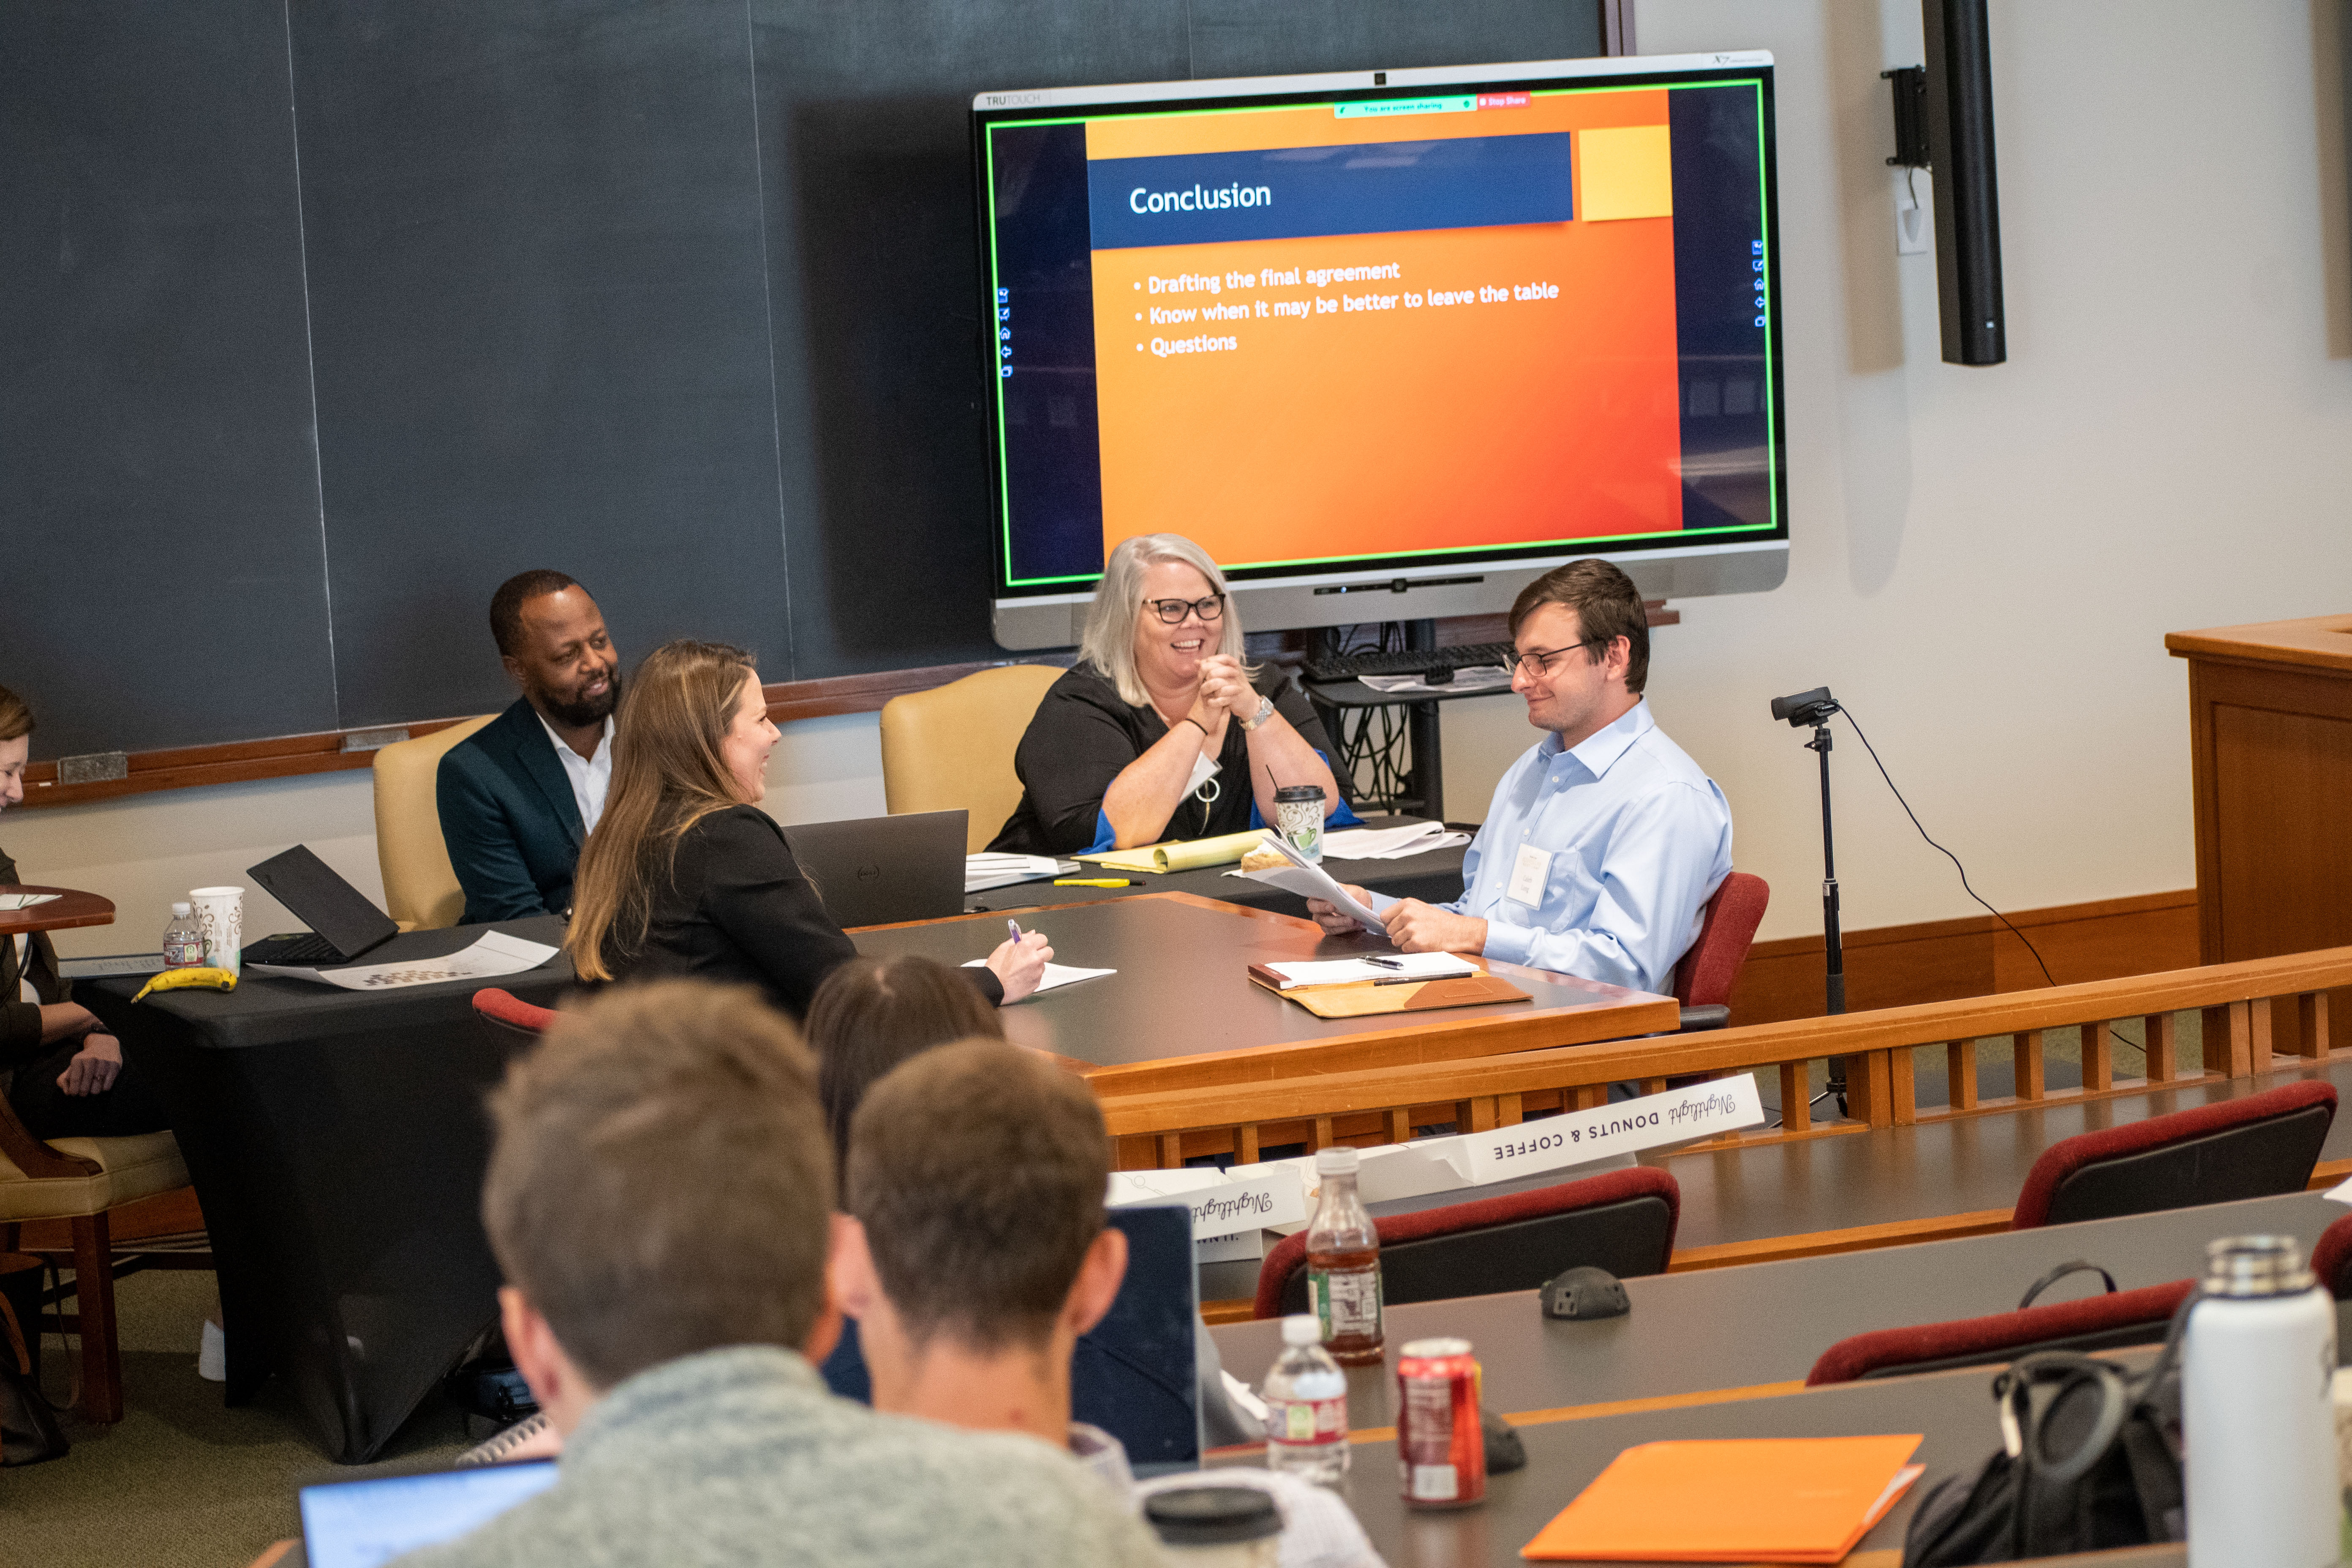 Steve Bolden, Shanna Nugent, and Professor Kayla Landeros watch as students Caleb Long and Christine Barfield participate in a mock negotiation